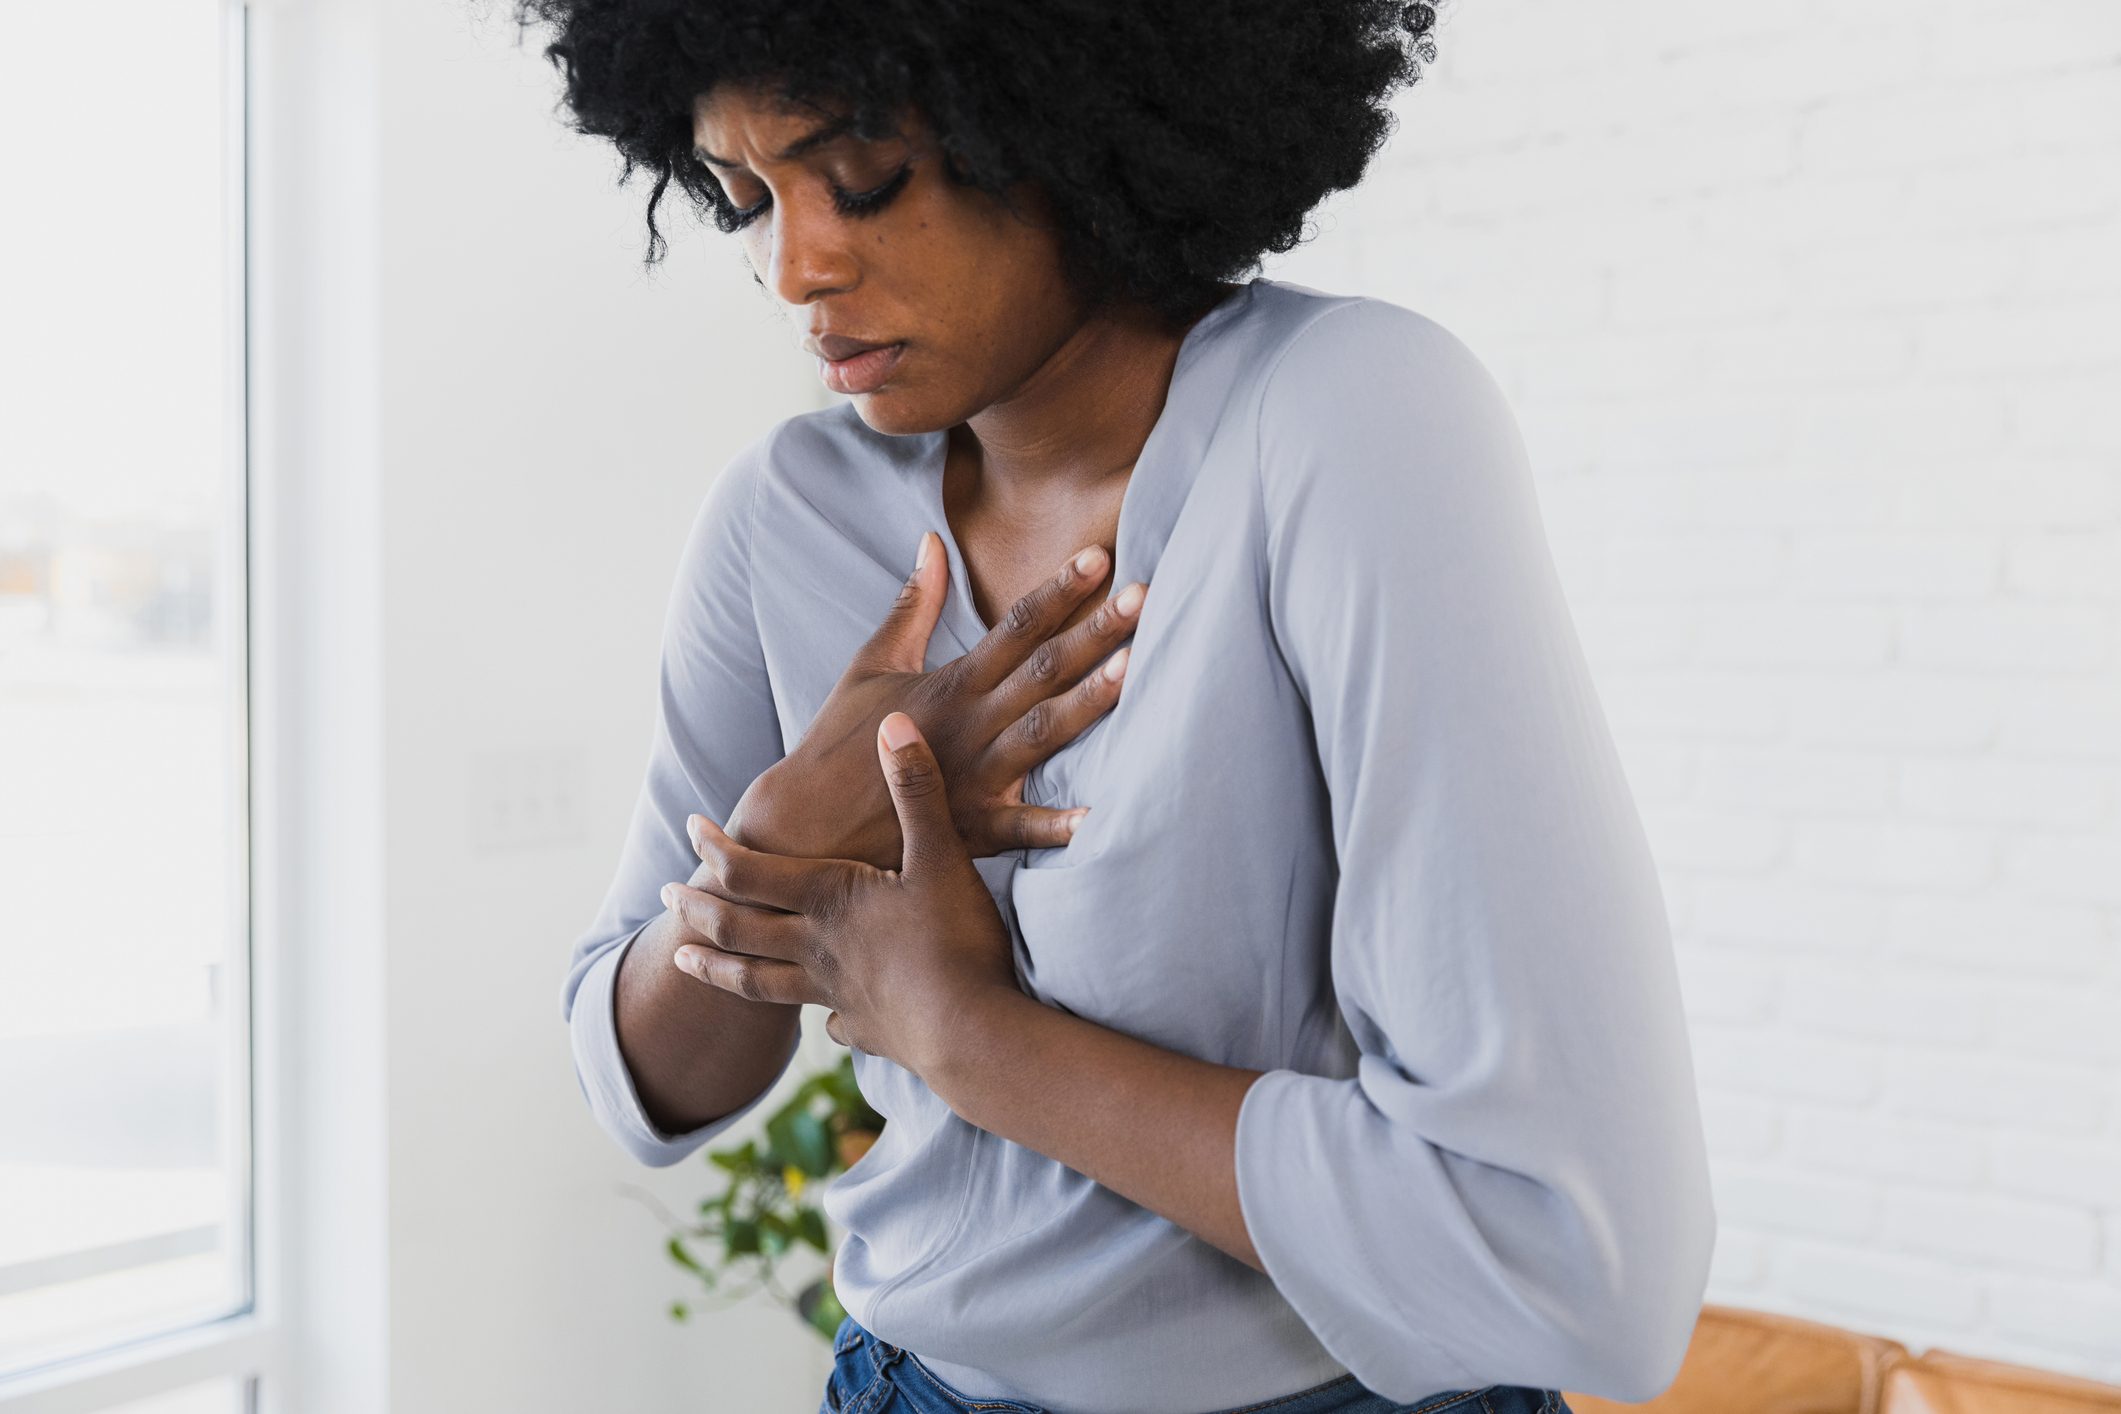 9 Symptoms of Pericarditis—Heart Inflammation That Can Feel Like a Heart Attack